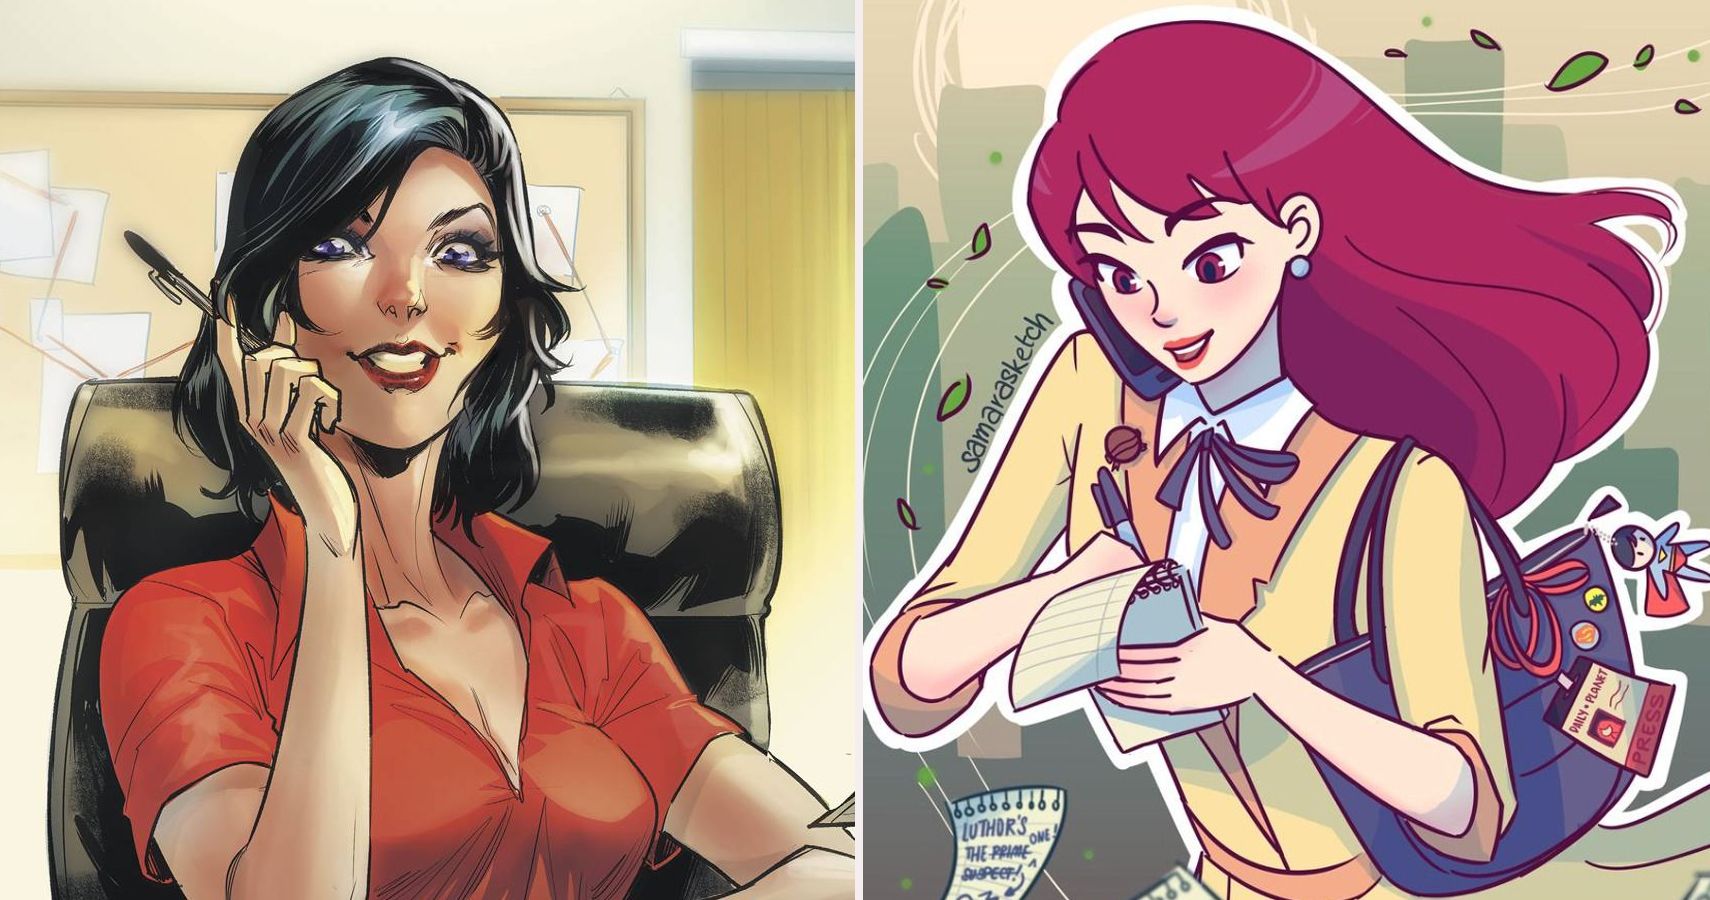 10 Lois Lane Fan Art Pictures That’ll Scoop The Competition.